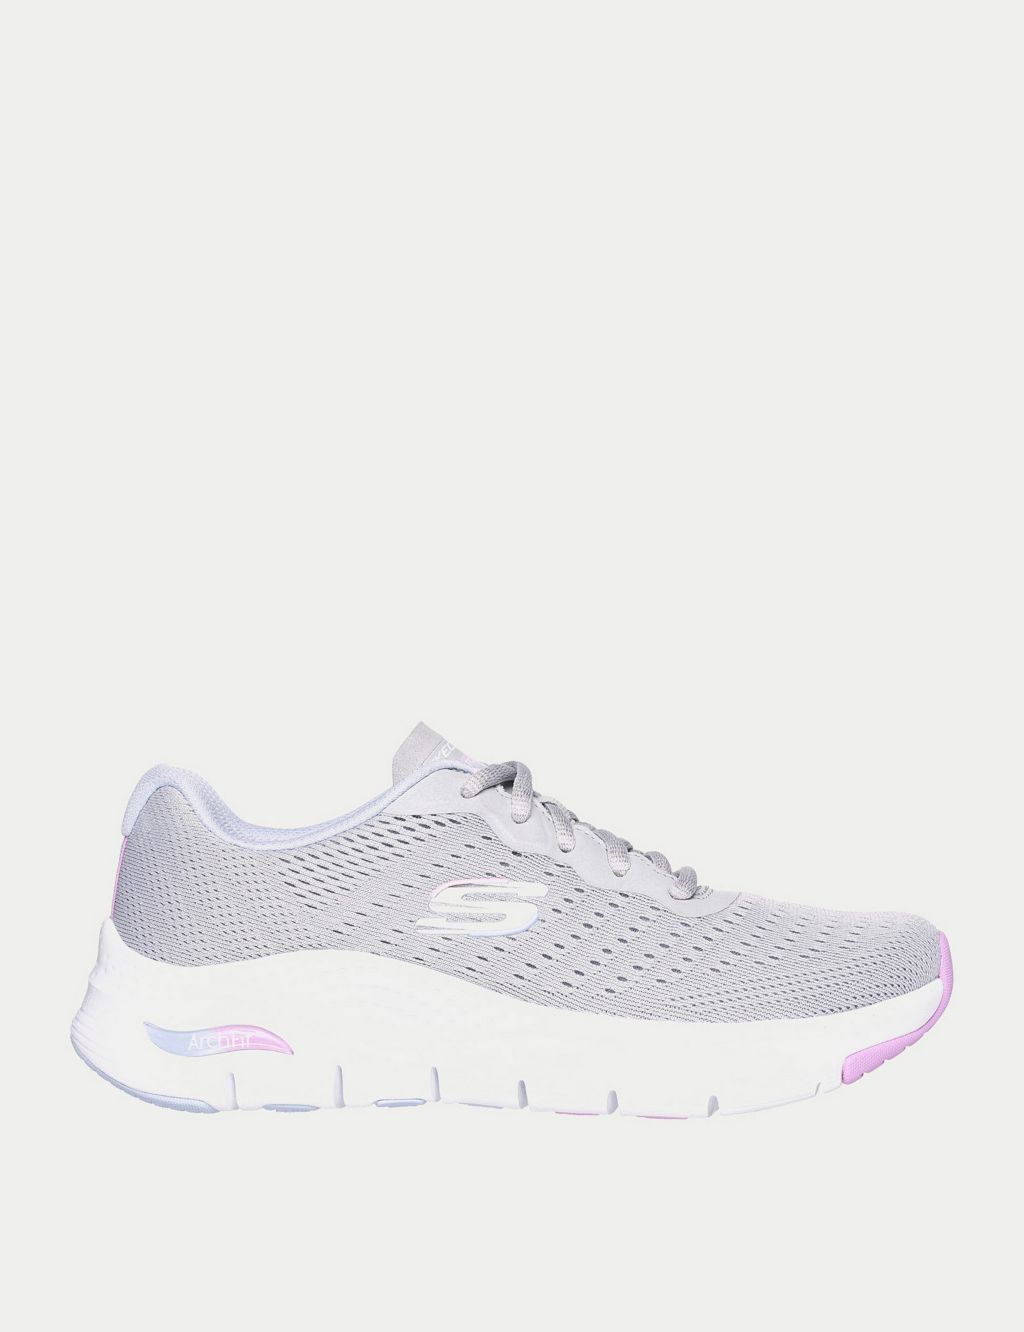 Arch Fit™ Infinity Lace Up Mesh Trainers image 1